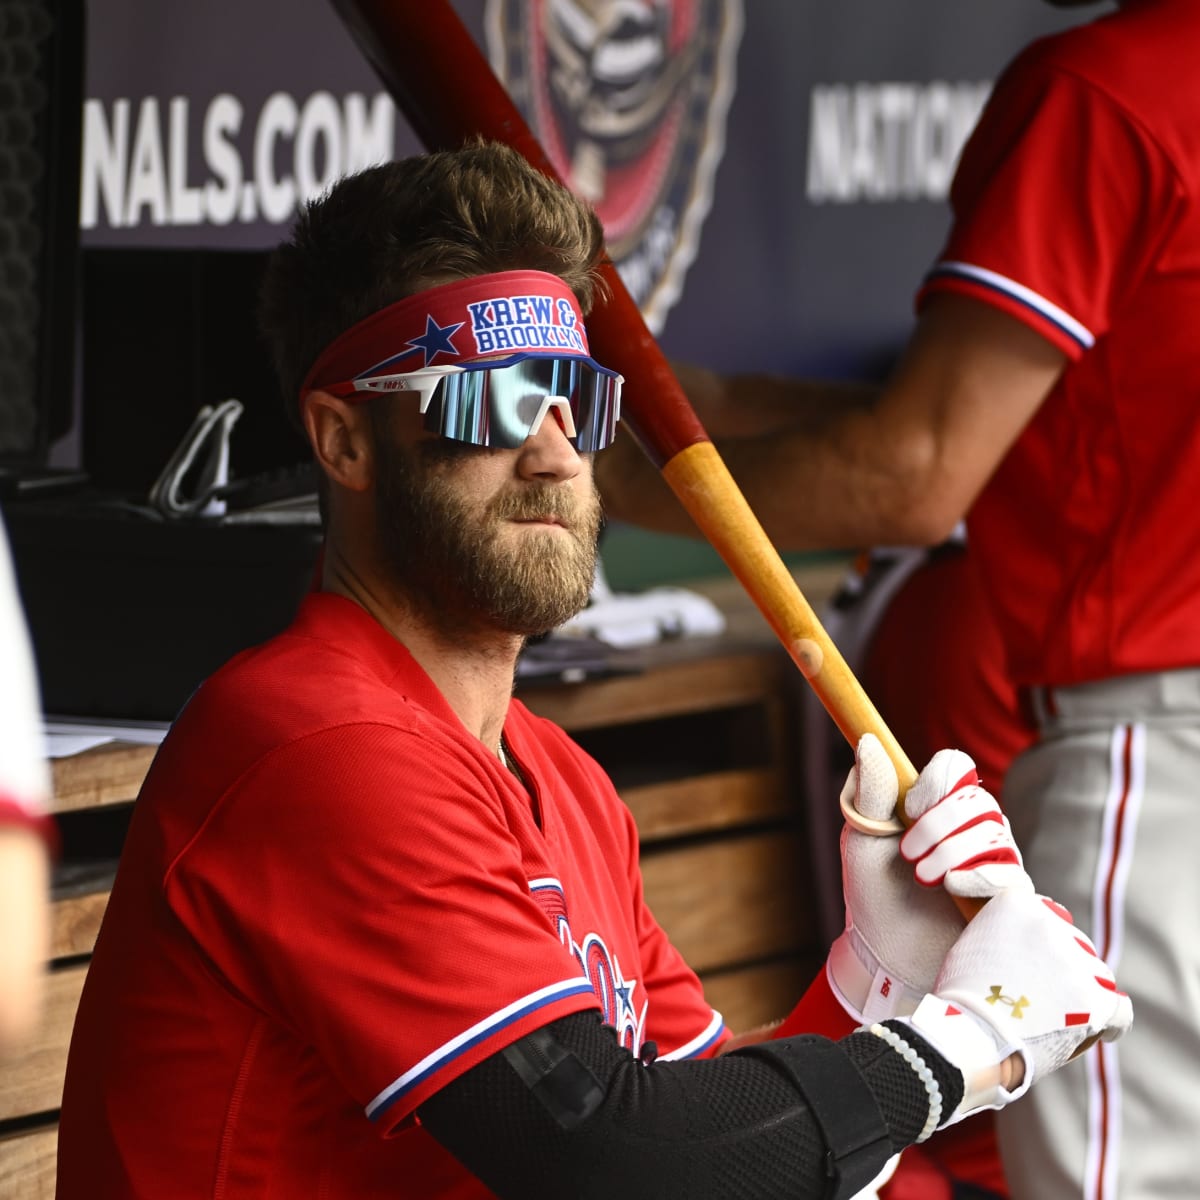 Phillies stock watch: The big bats showed up against the Padres